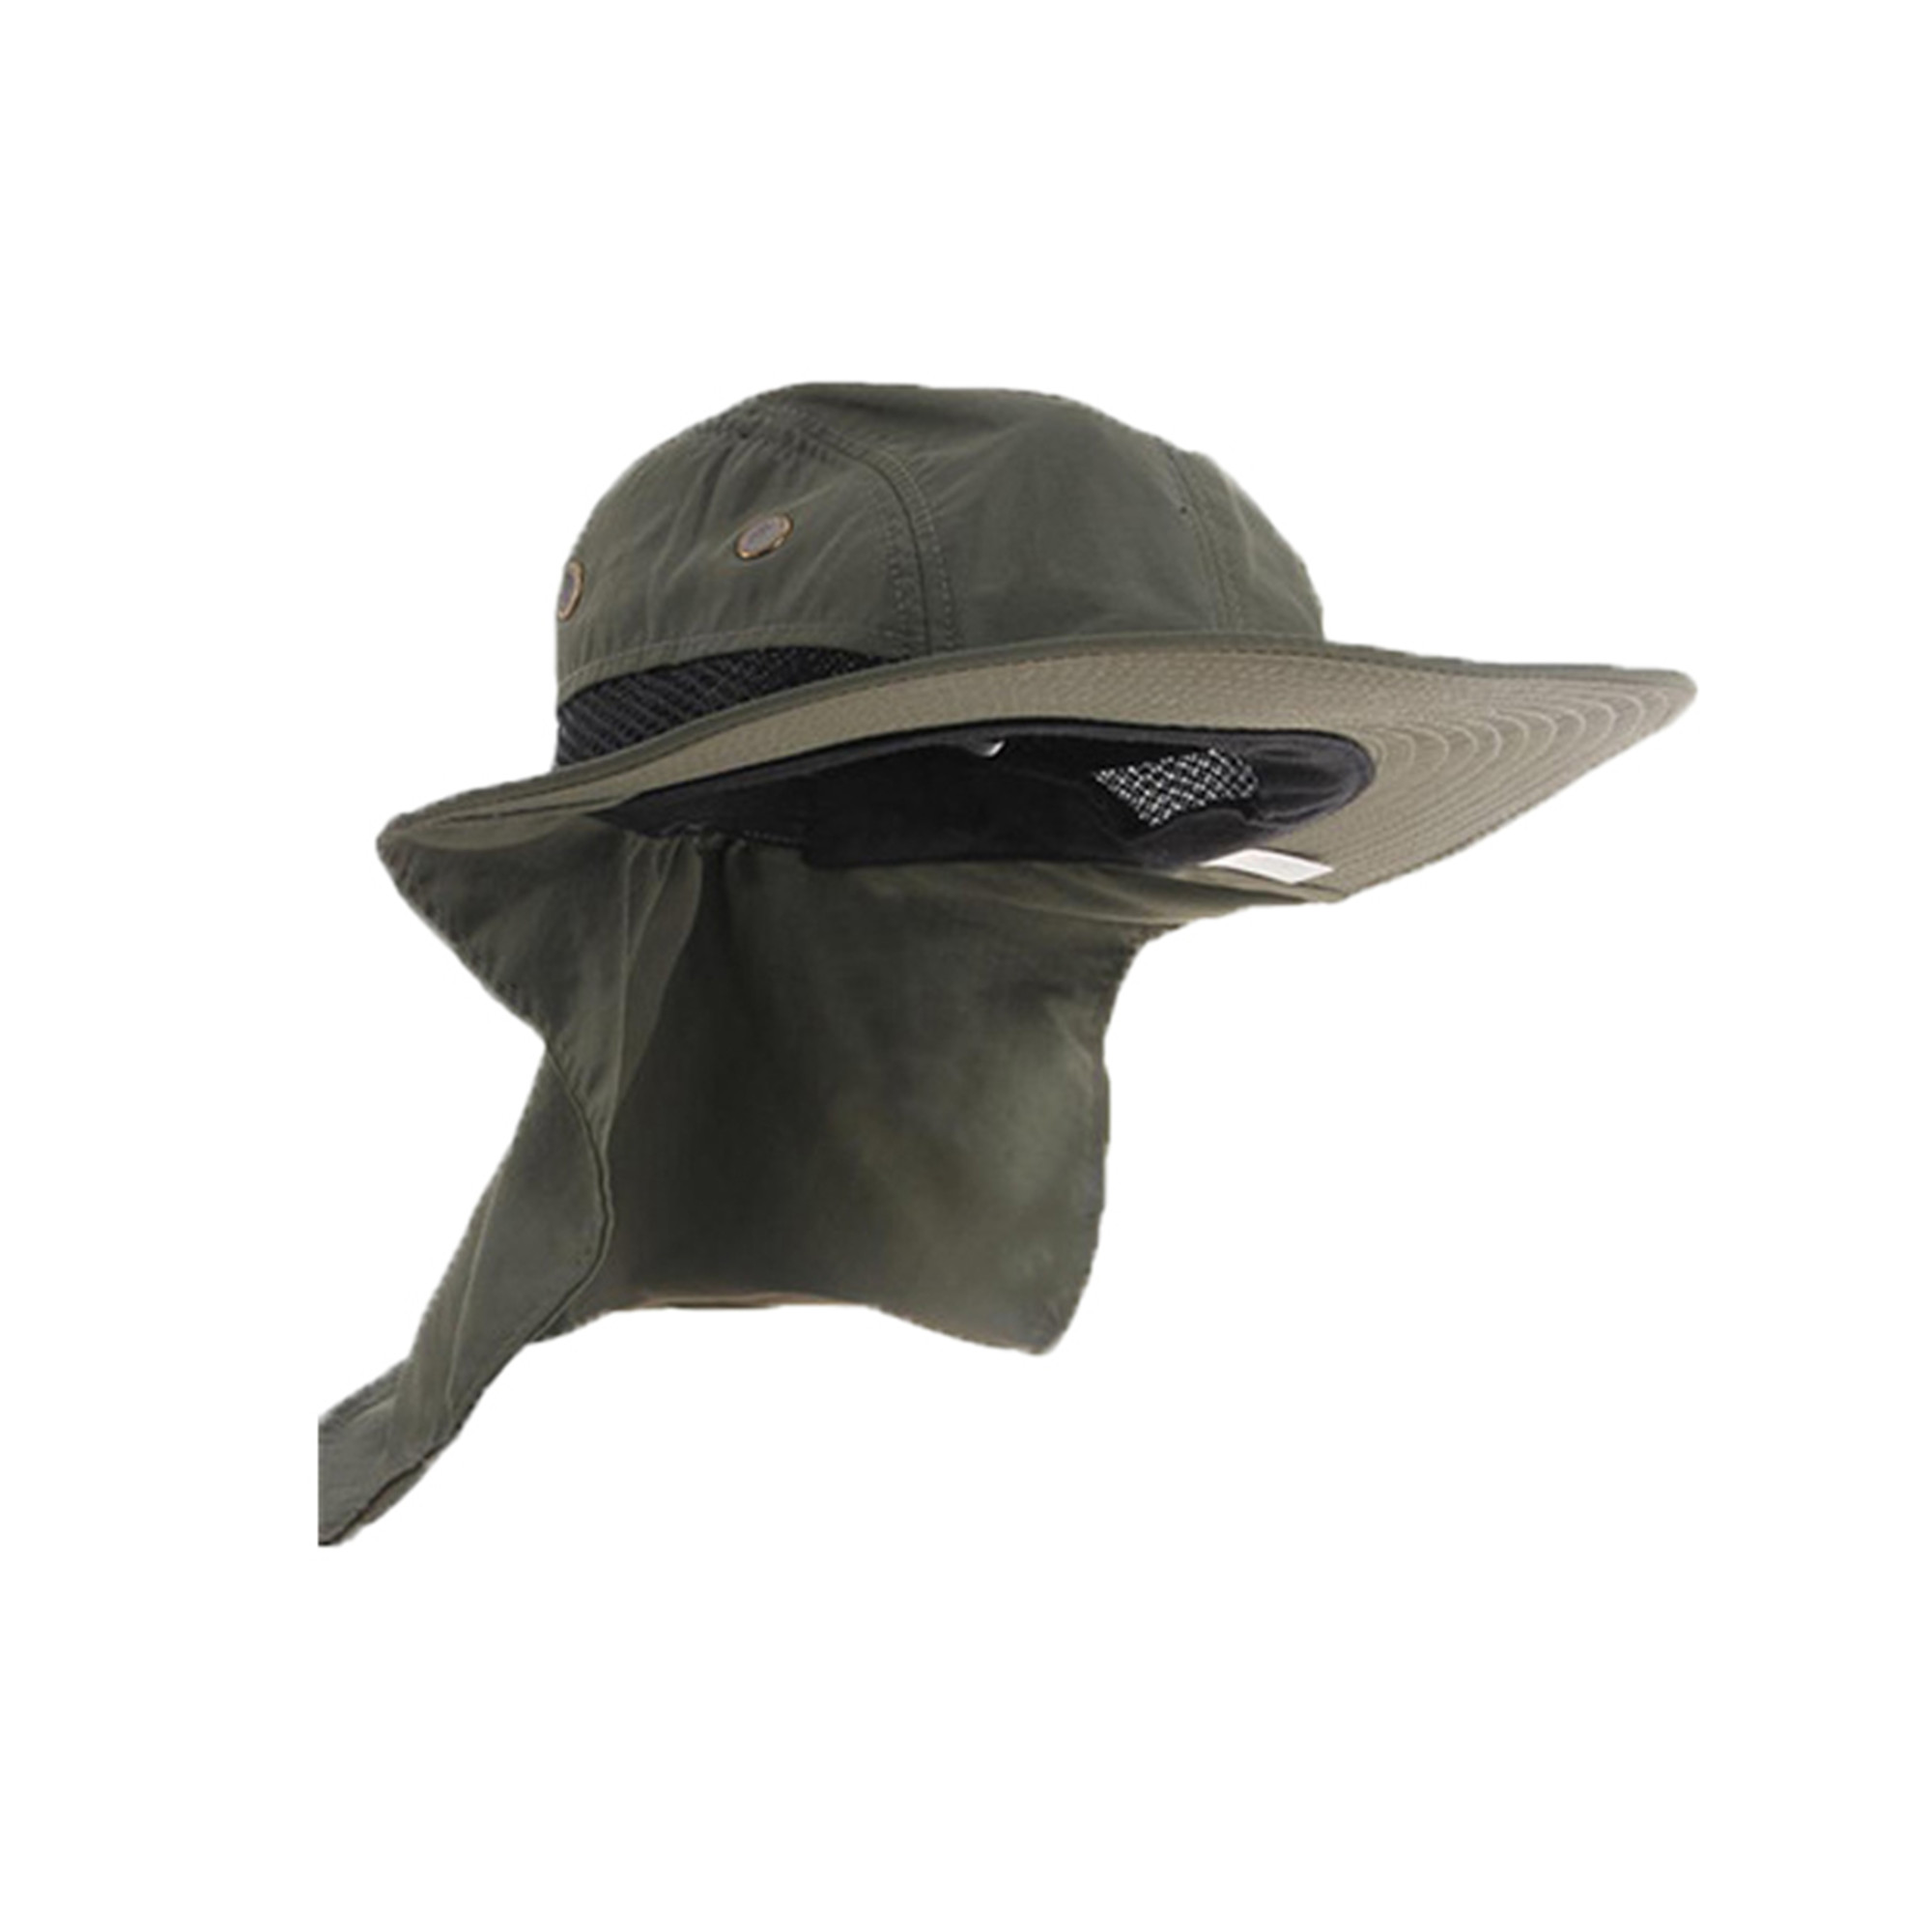 Sunisery Outdoor Fishing Hiking Boonie Snap Hat Brim Ear Neck Cover Sun Flap Cap - image 2 of 4